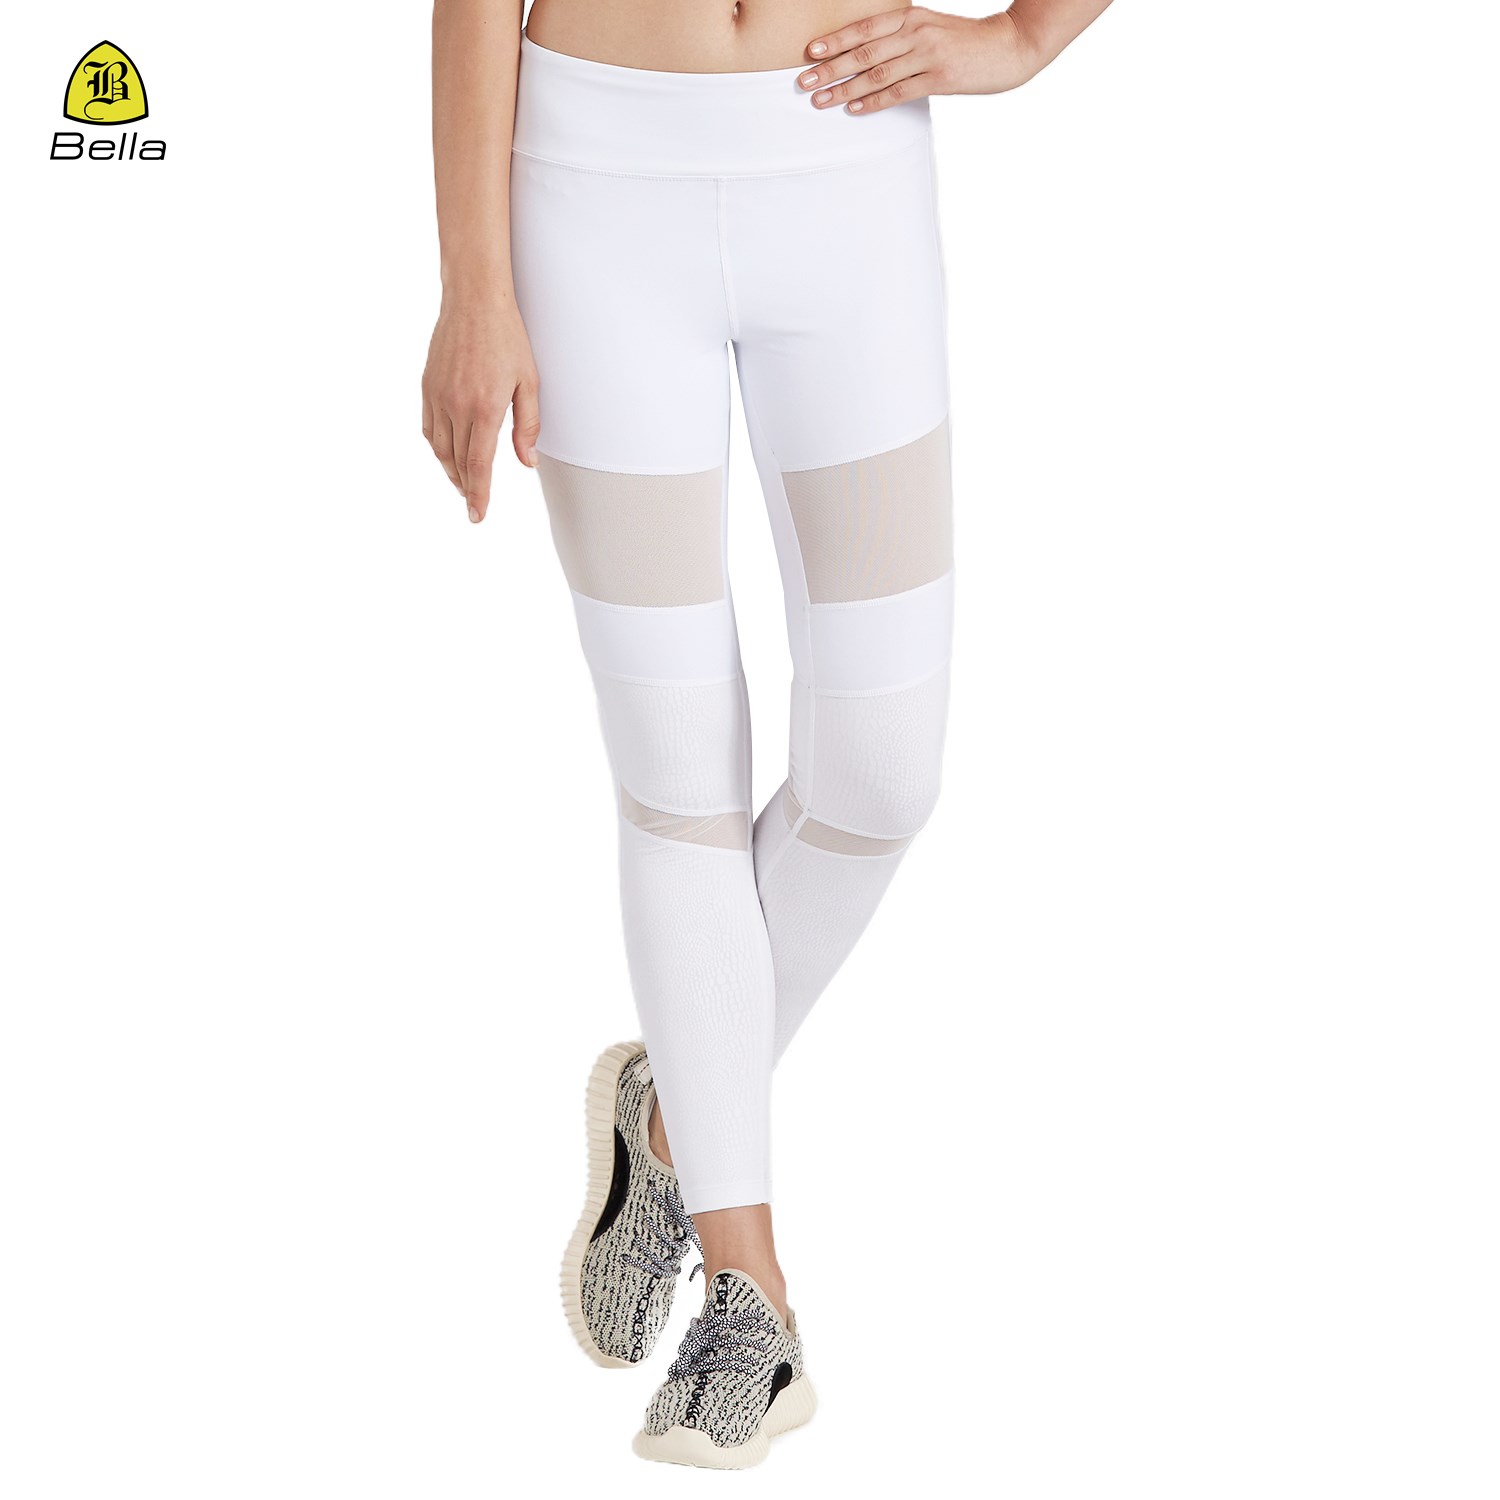 Fitness-Leggings mit hoher Taille